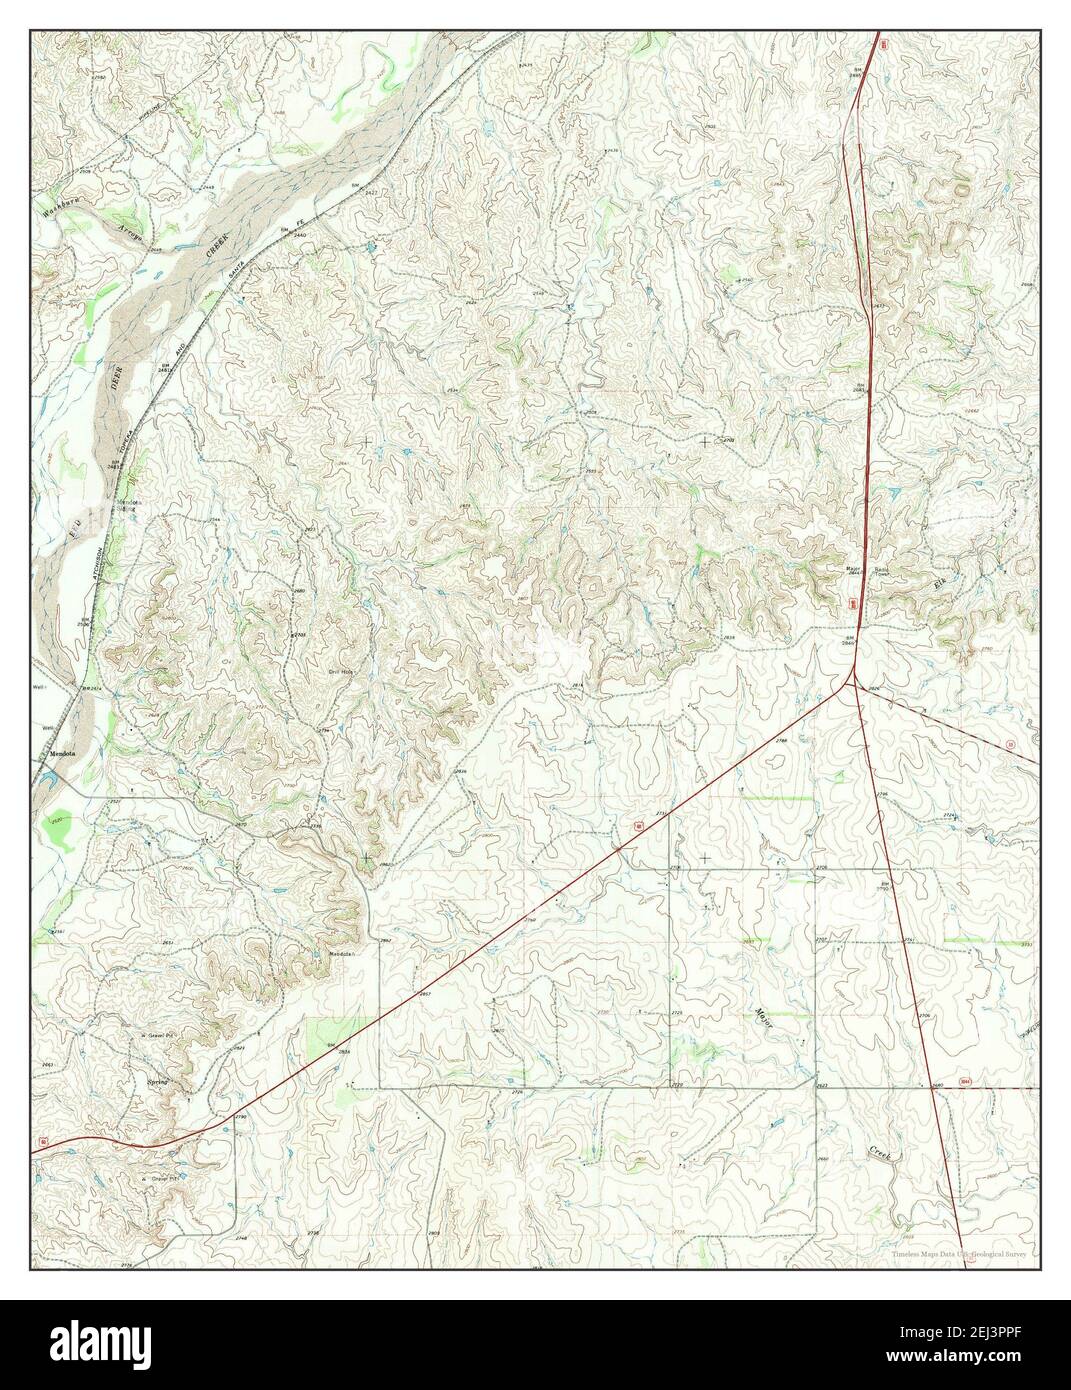 Mendota, Texas, map 1967, 1:24000, United States of America by Timeless Maps, data U.S. Geological Survey Stock Photo